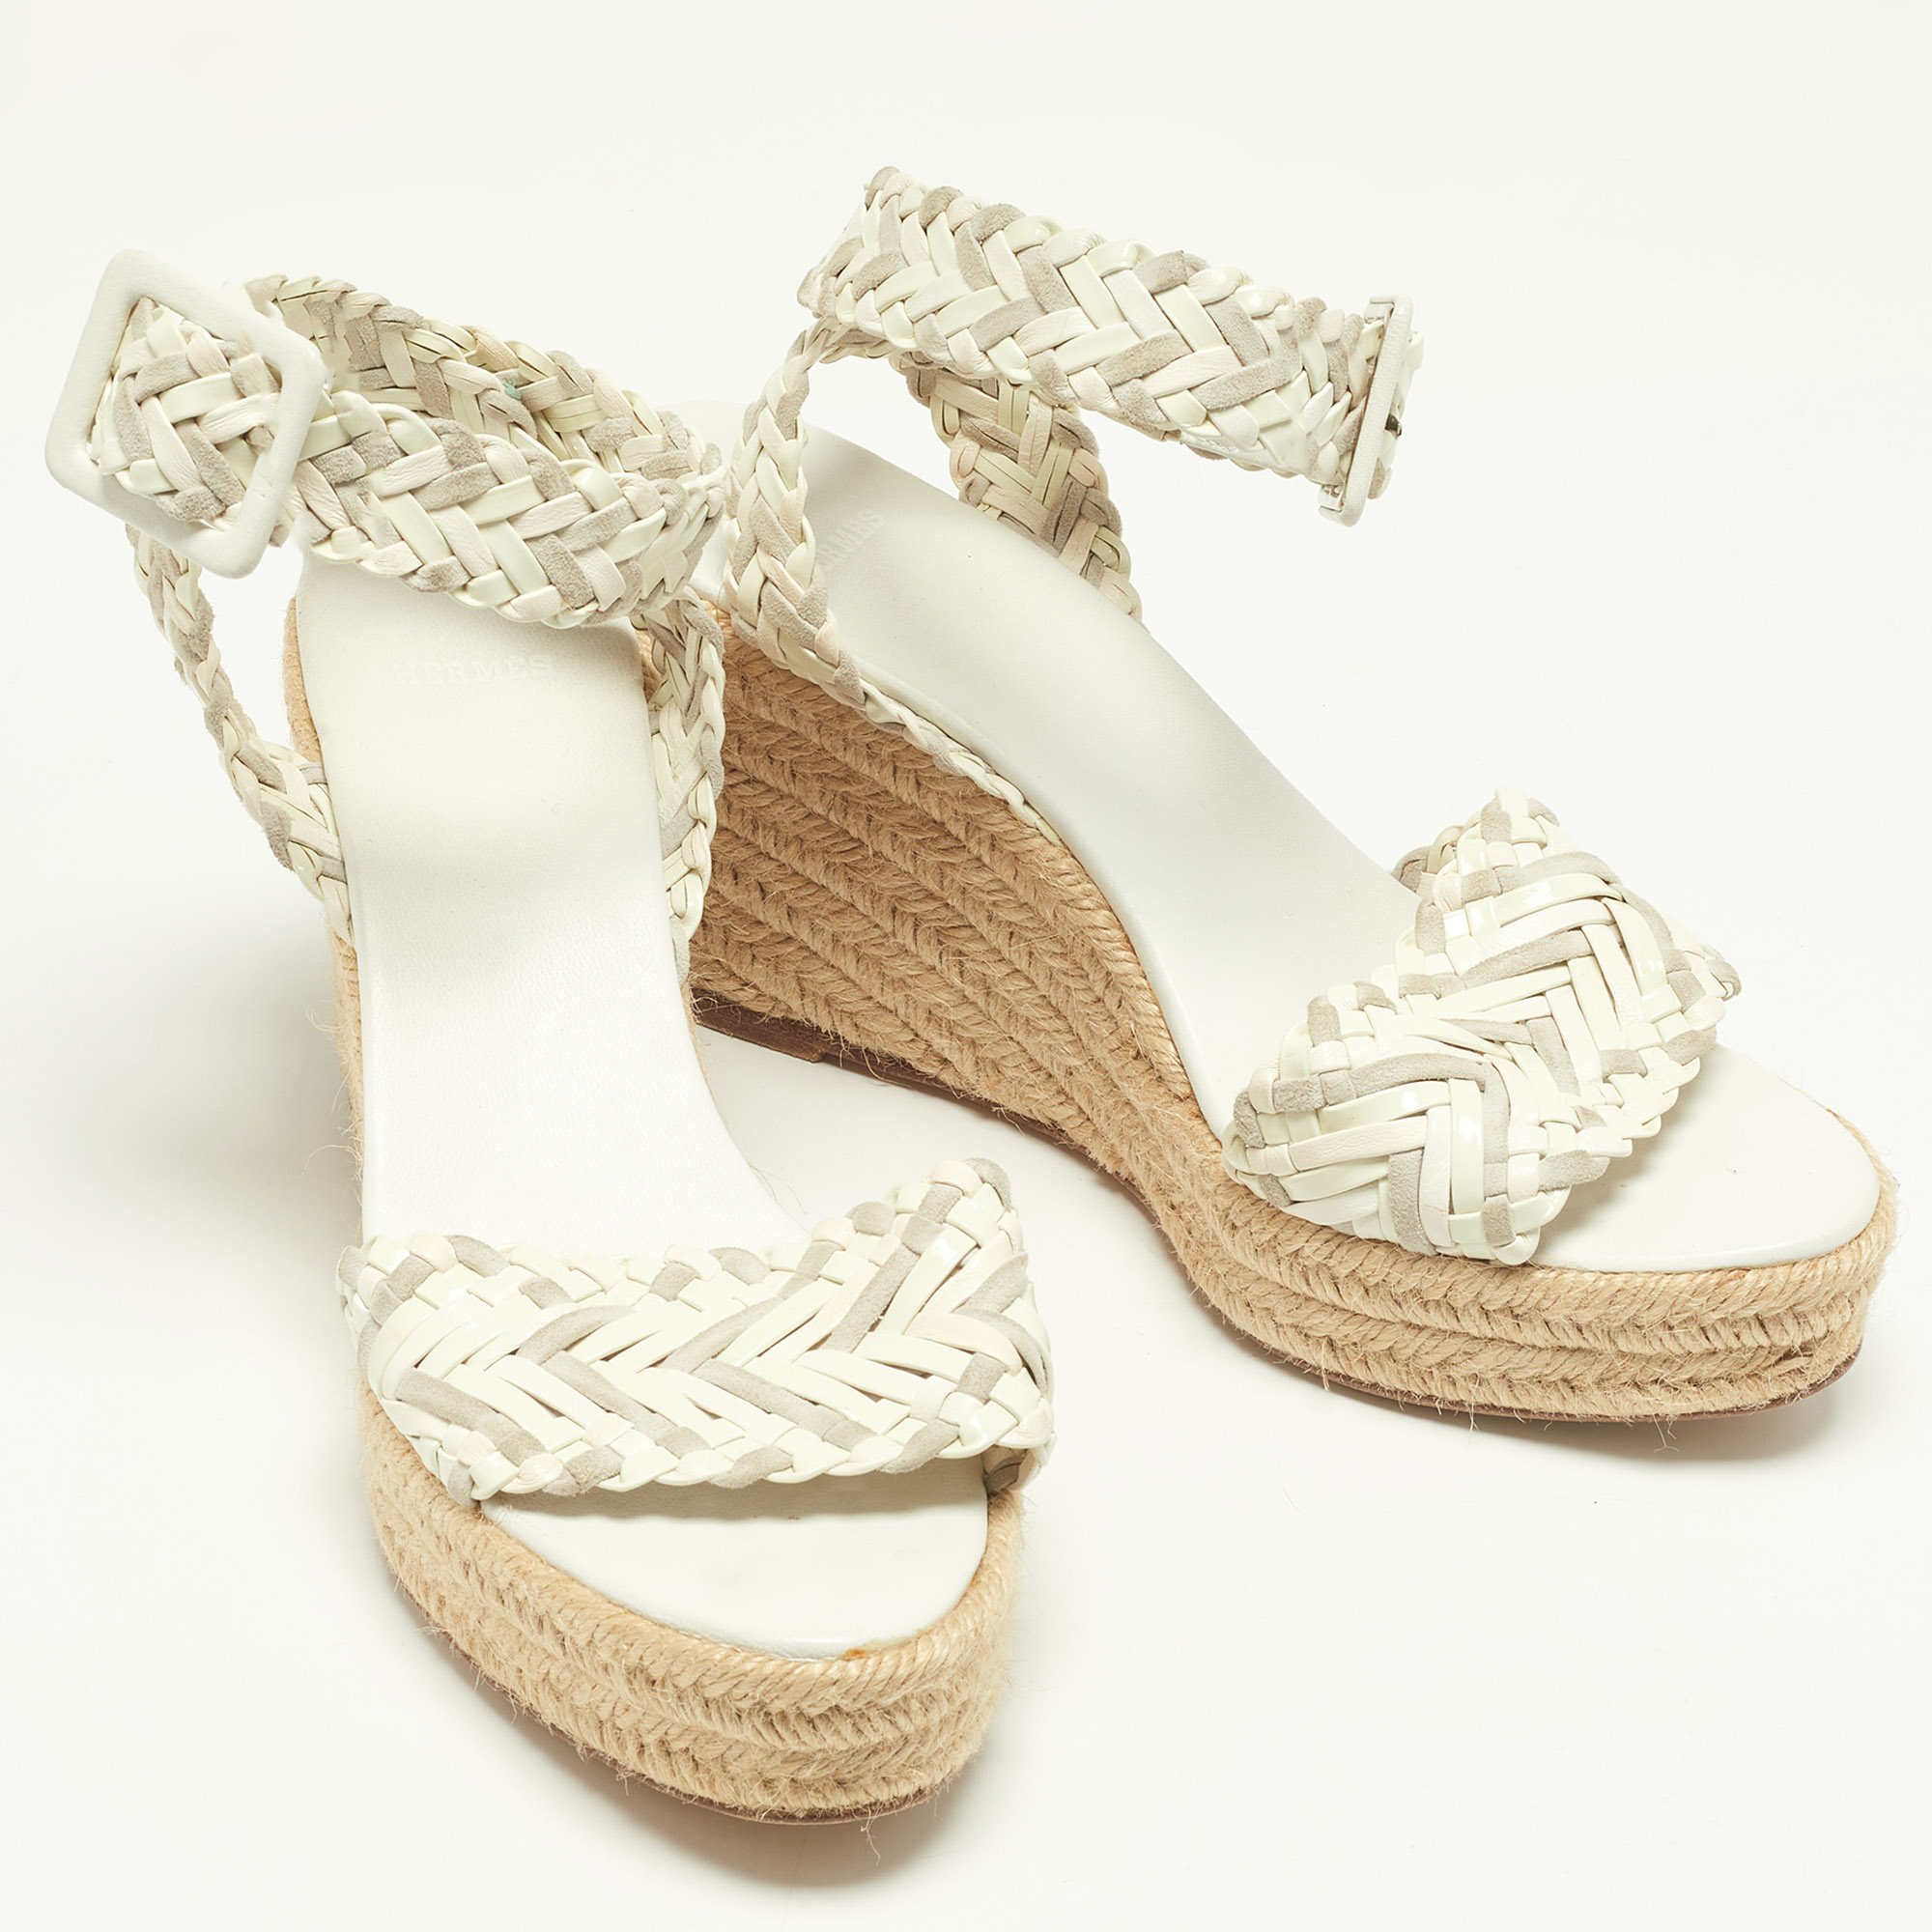 Hermes White/Grey Woven Patent Leather And Suede Sofia Espadrille Wedge Sandals Size 39